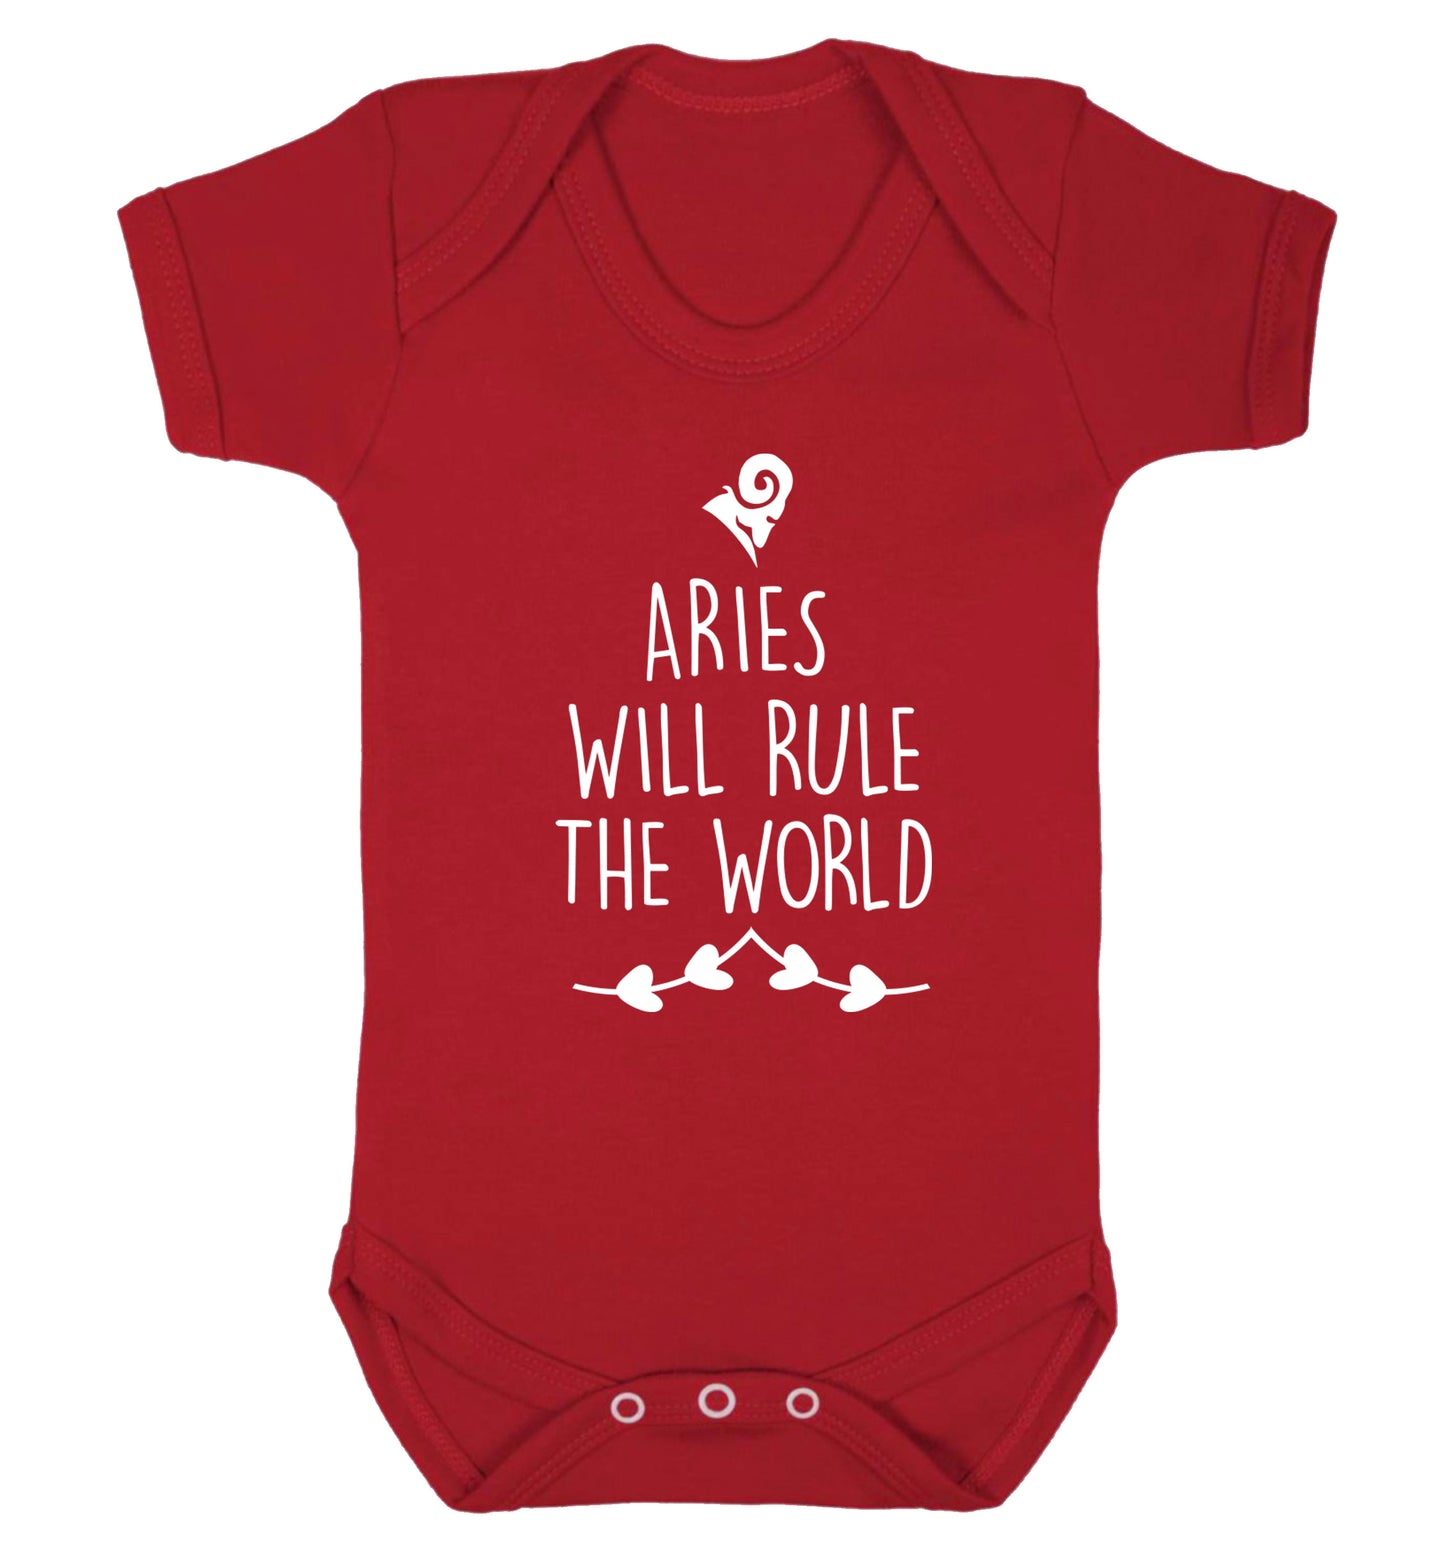 Aries will rule the world Baby Vest red 18-24 months